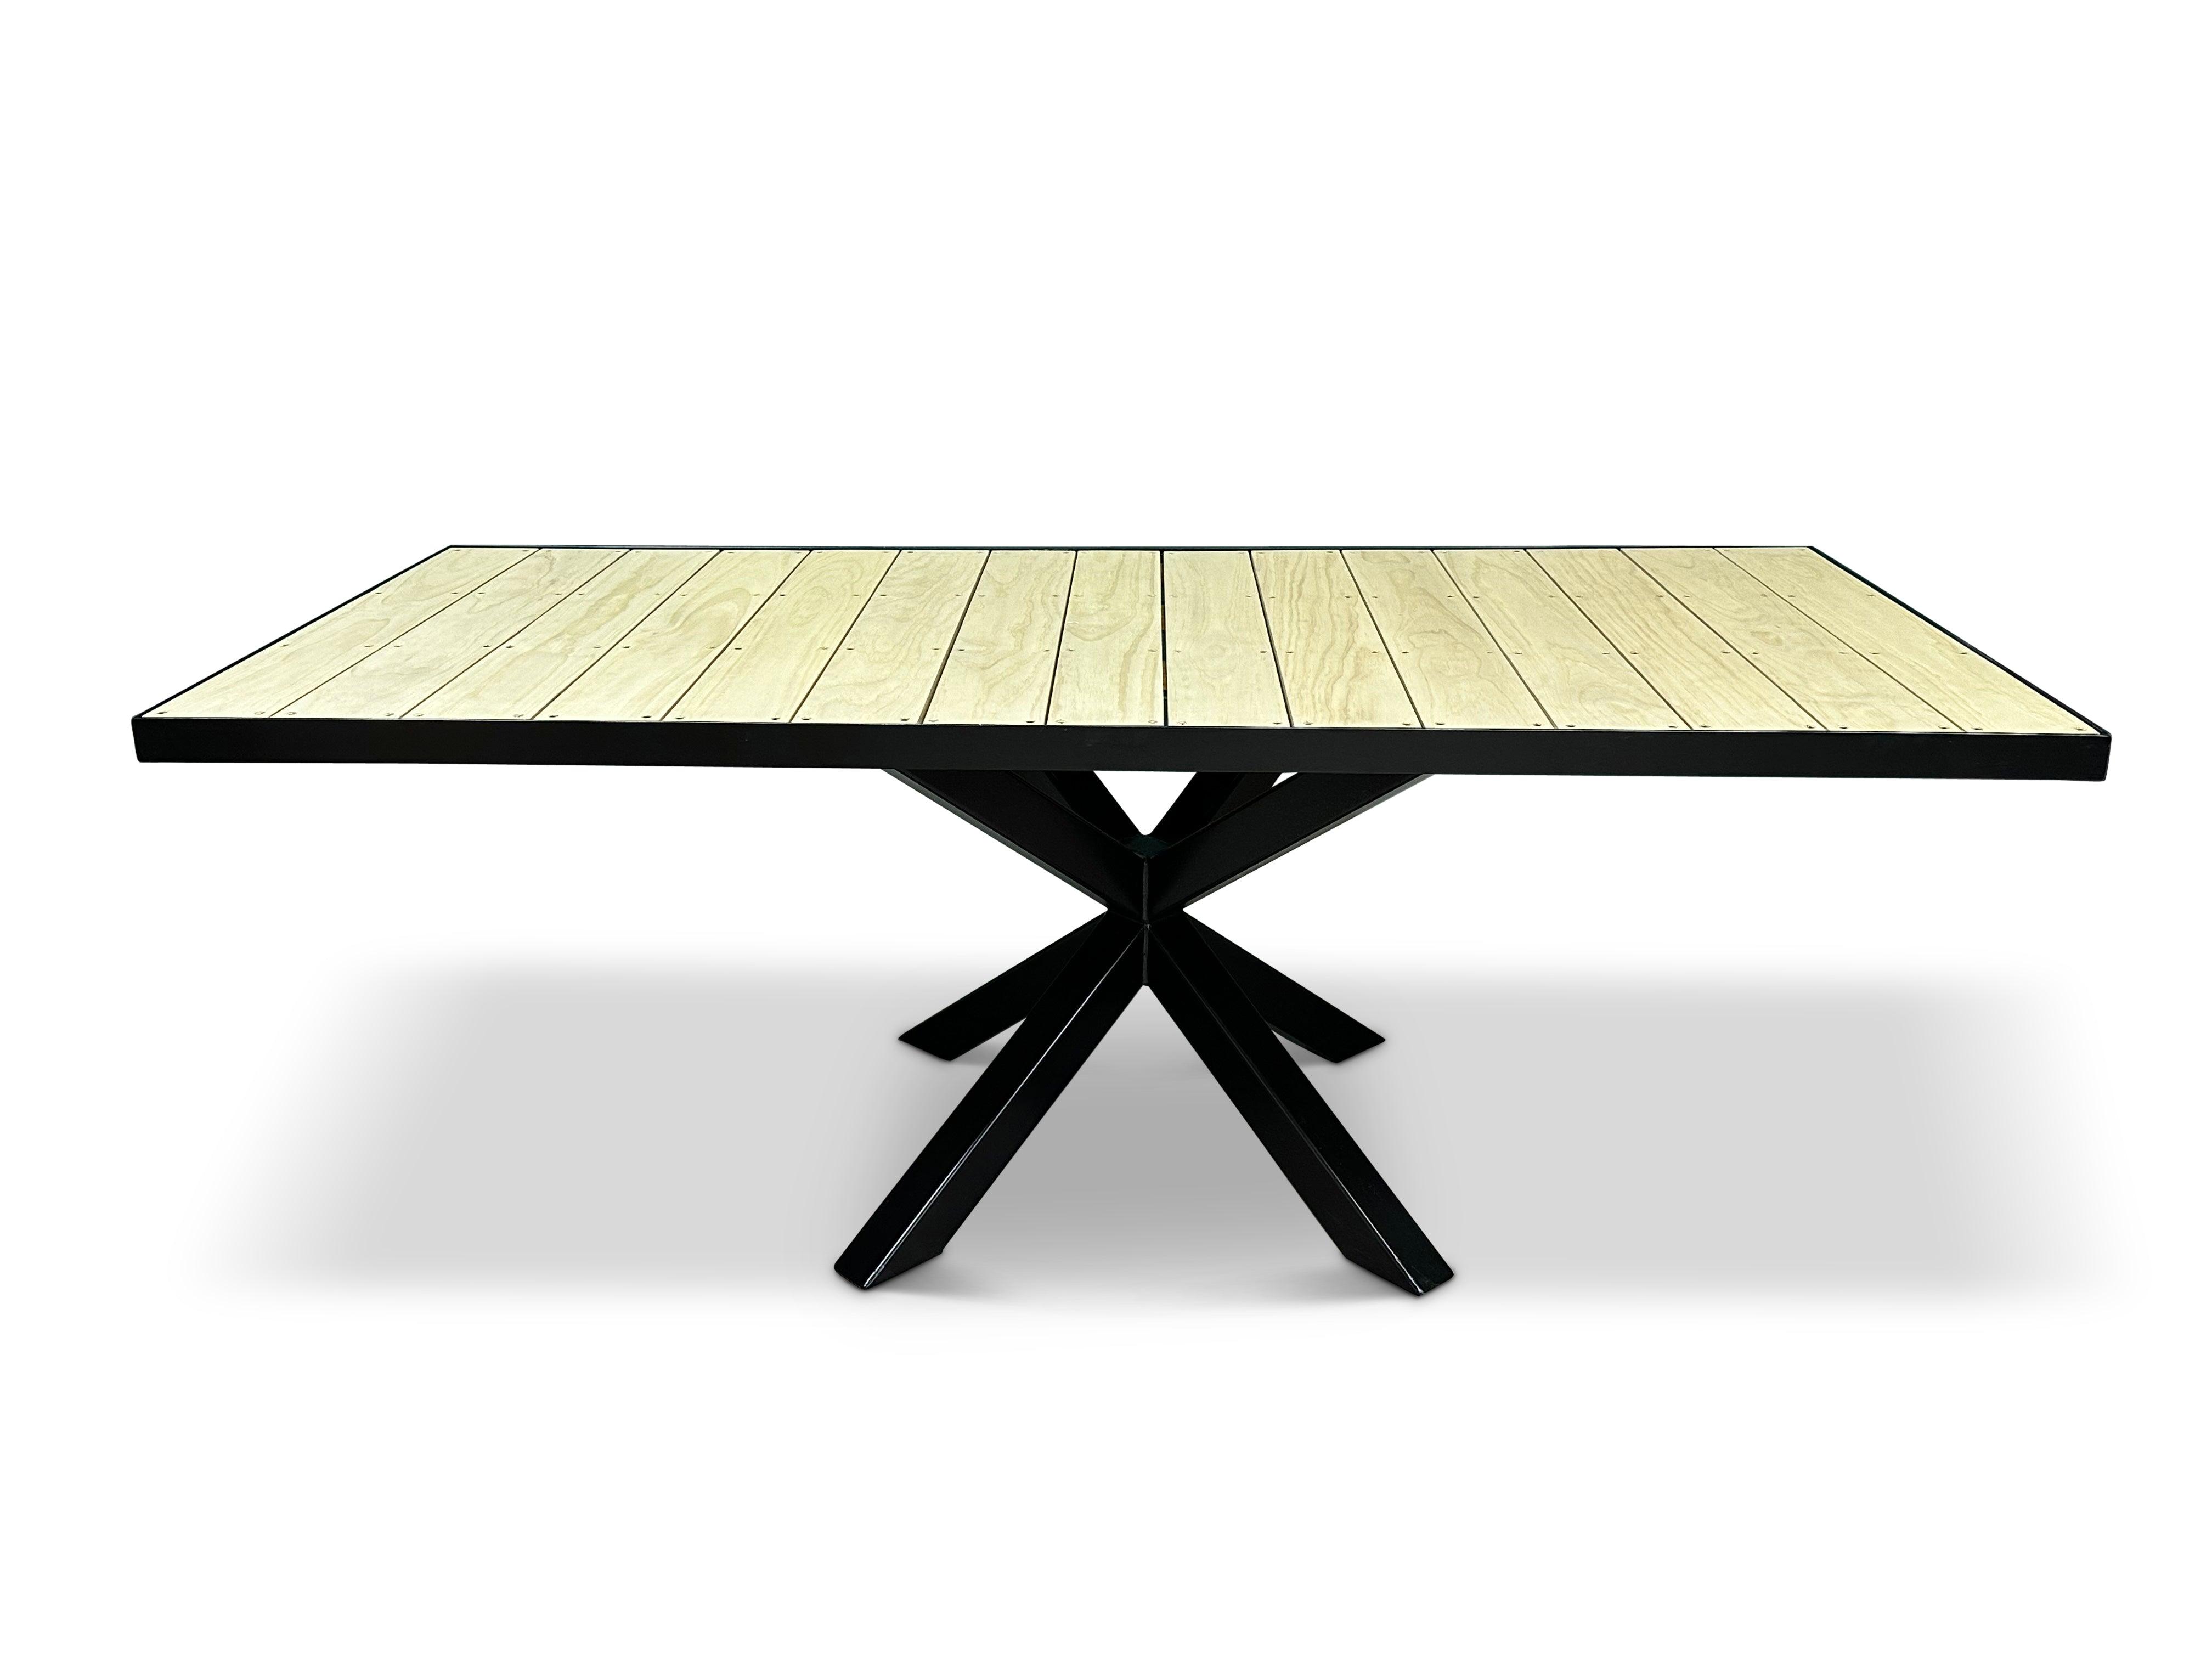 Exterior Dining Table - Asterix Frame - Innate Furniture